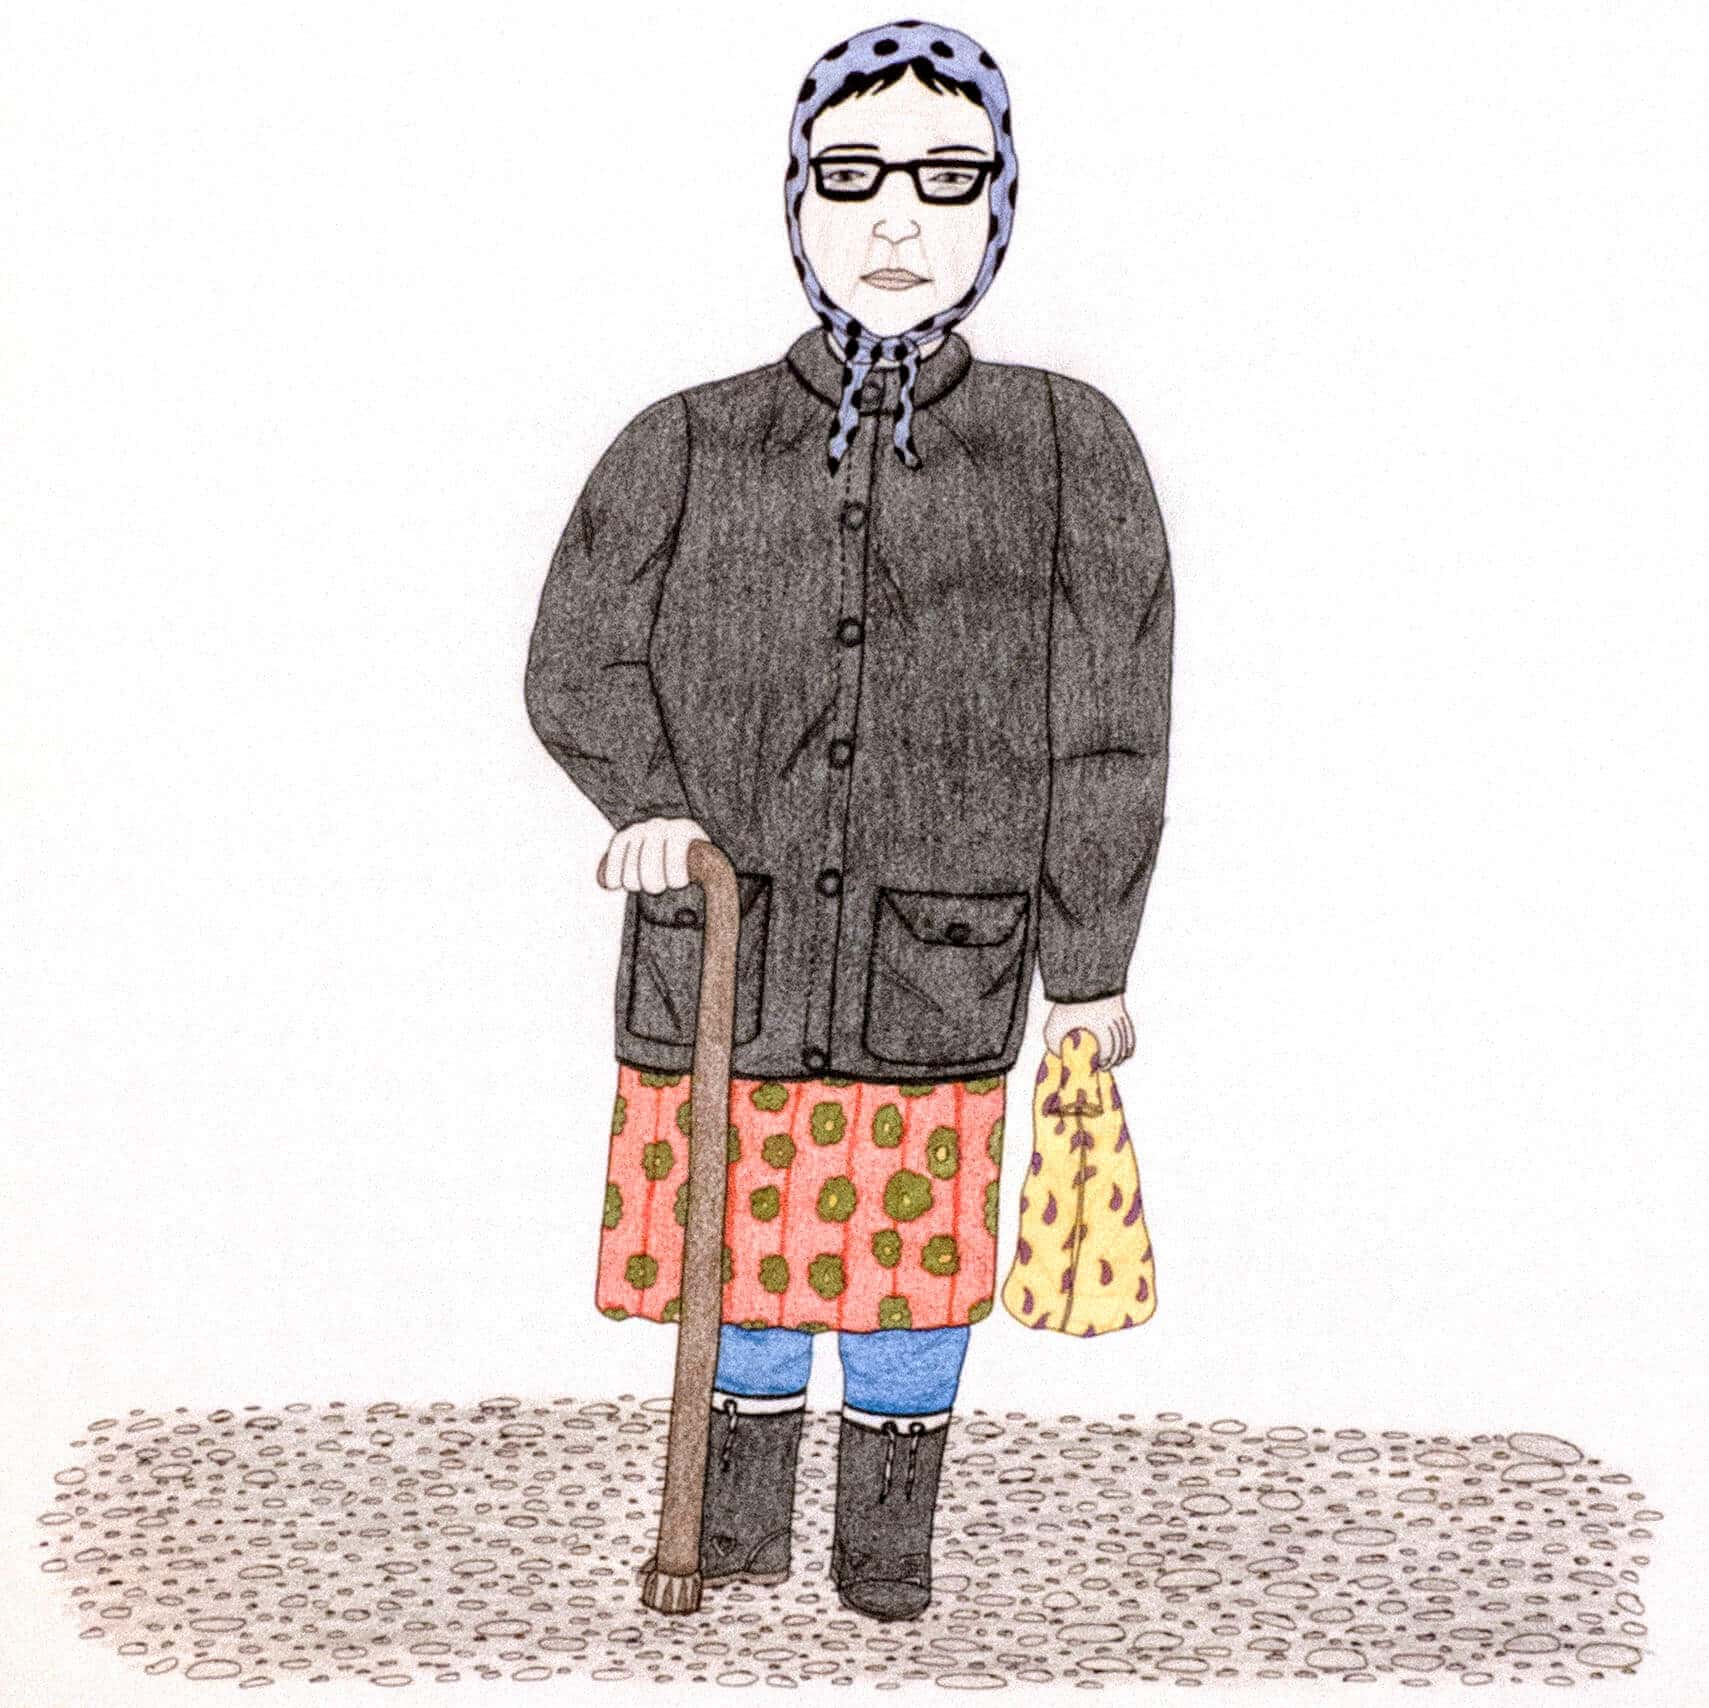 A Portrait of Pitseolak by Annie Pootoogook, pencil crayon, ink, Inuit, Cape Dorset (2003/2004)